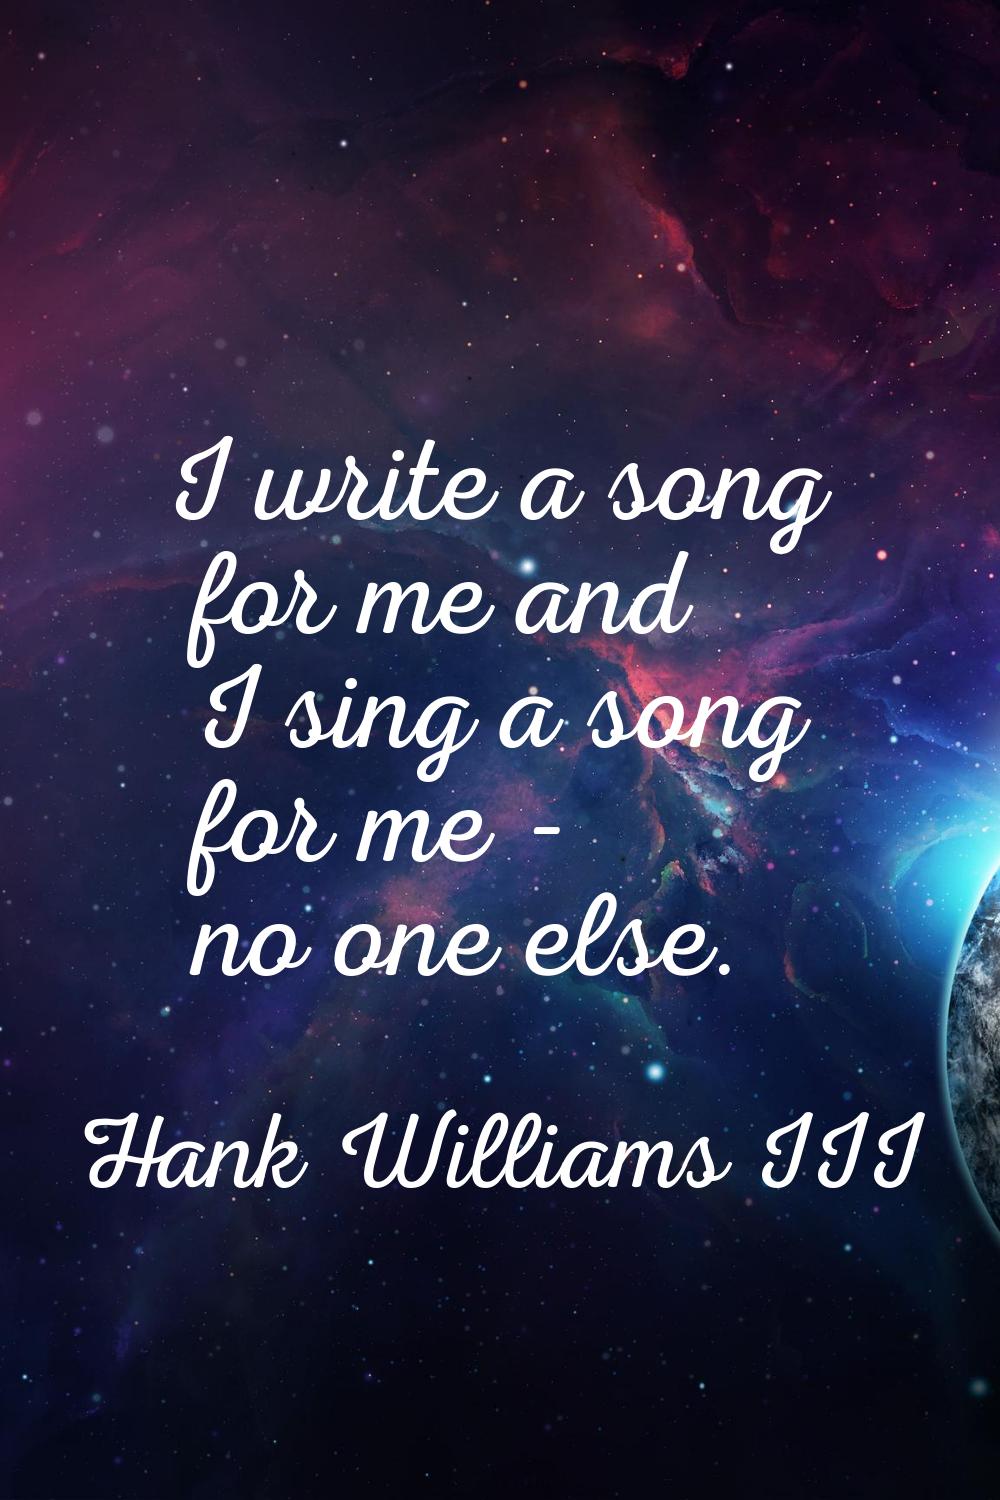 I write a song for me and I sing a song for me - no one else.